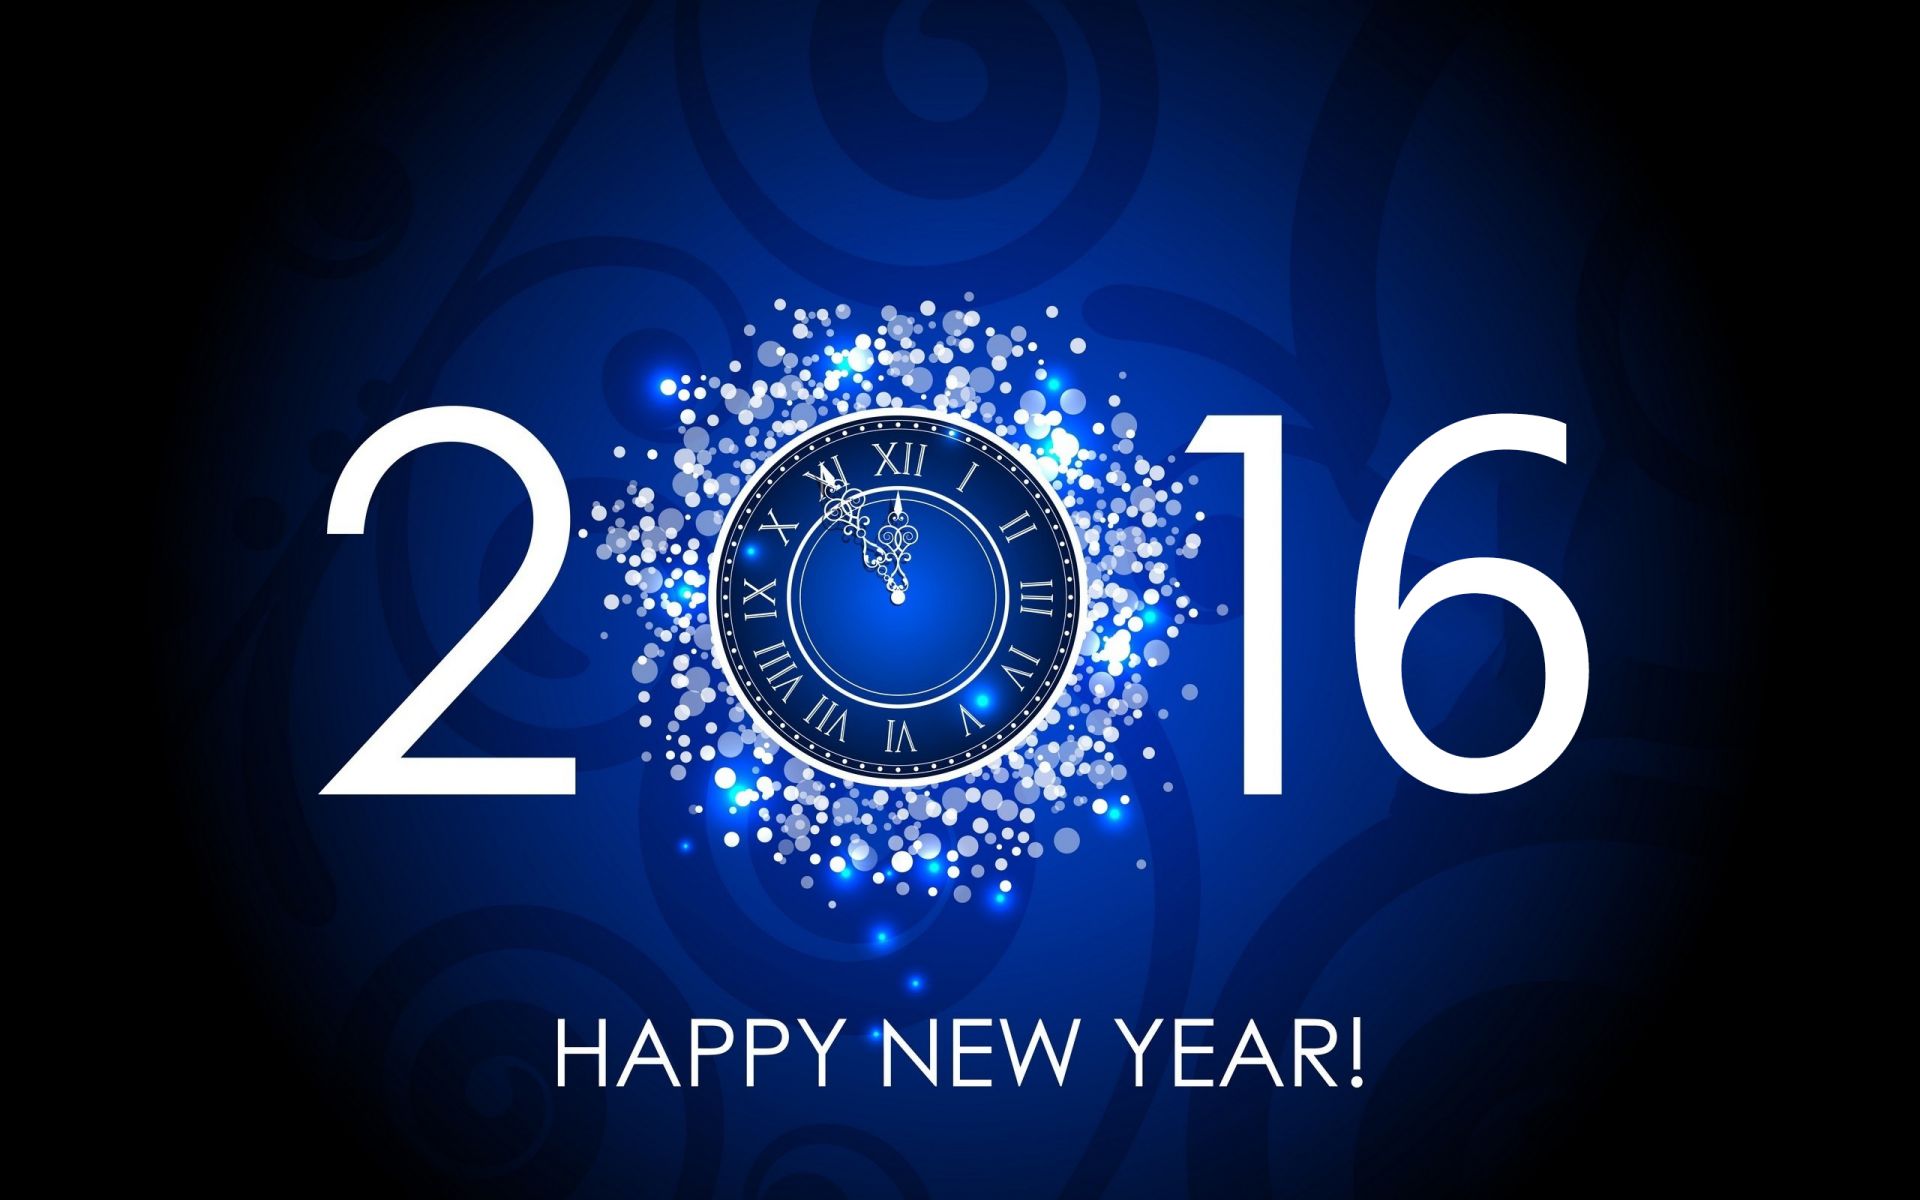 Happy New Year HD Wallpaper For Mobile And